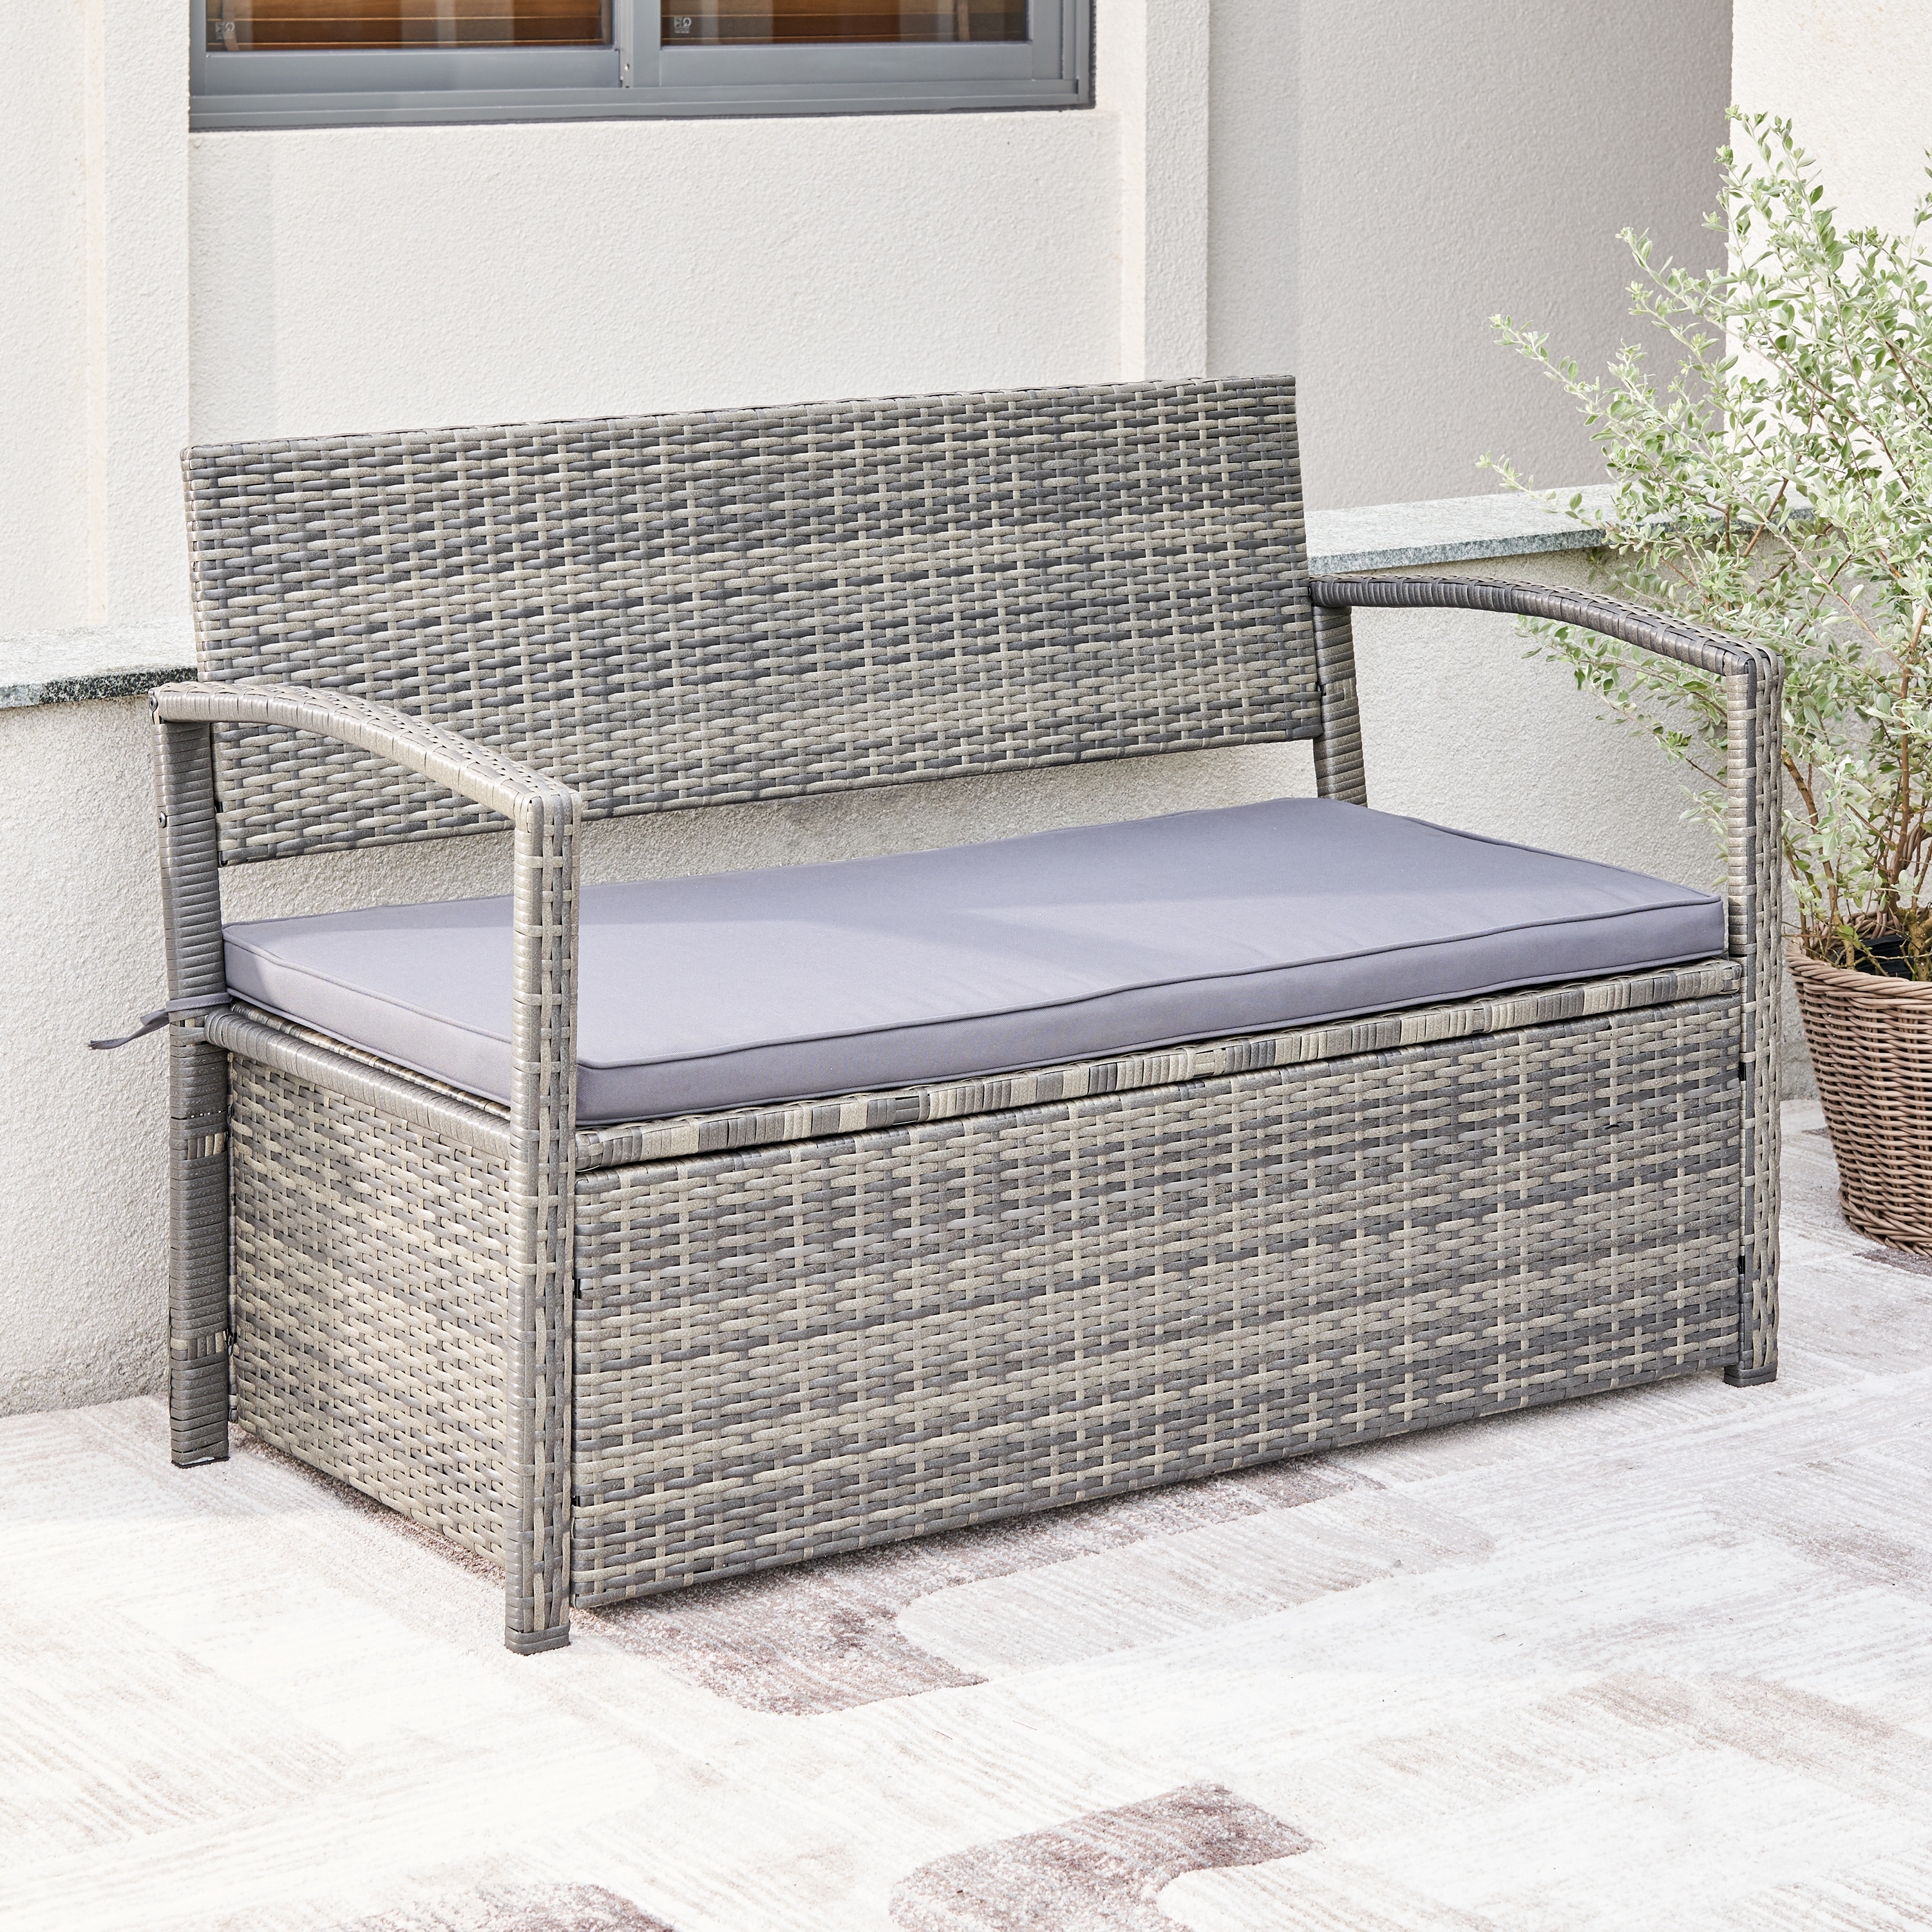 Gabrielle All-weather Resin Wicker Lounge Patio Sofa Storage Bench with Cushion